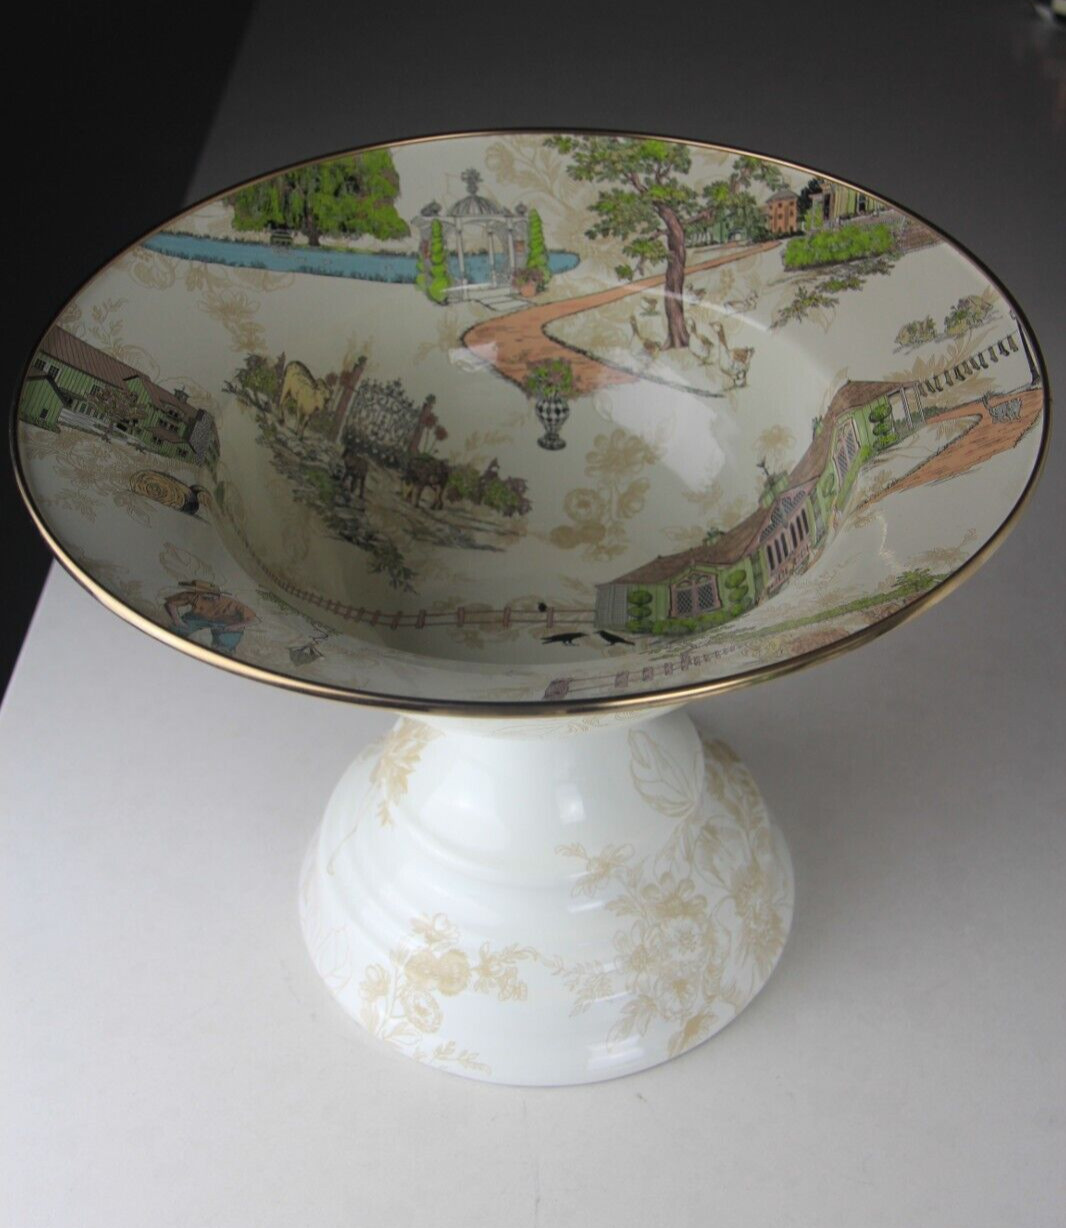 MACKENZIE CHILDS AURORA ENAMEL FOOTED CENTERPIECE LARGE COMPOTE RETIRED